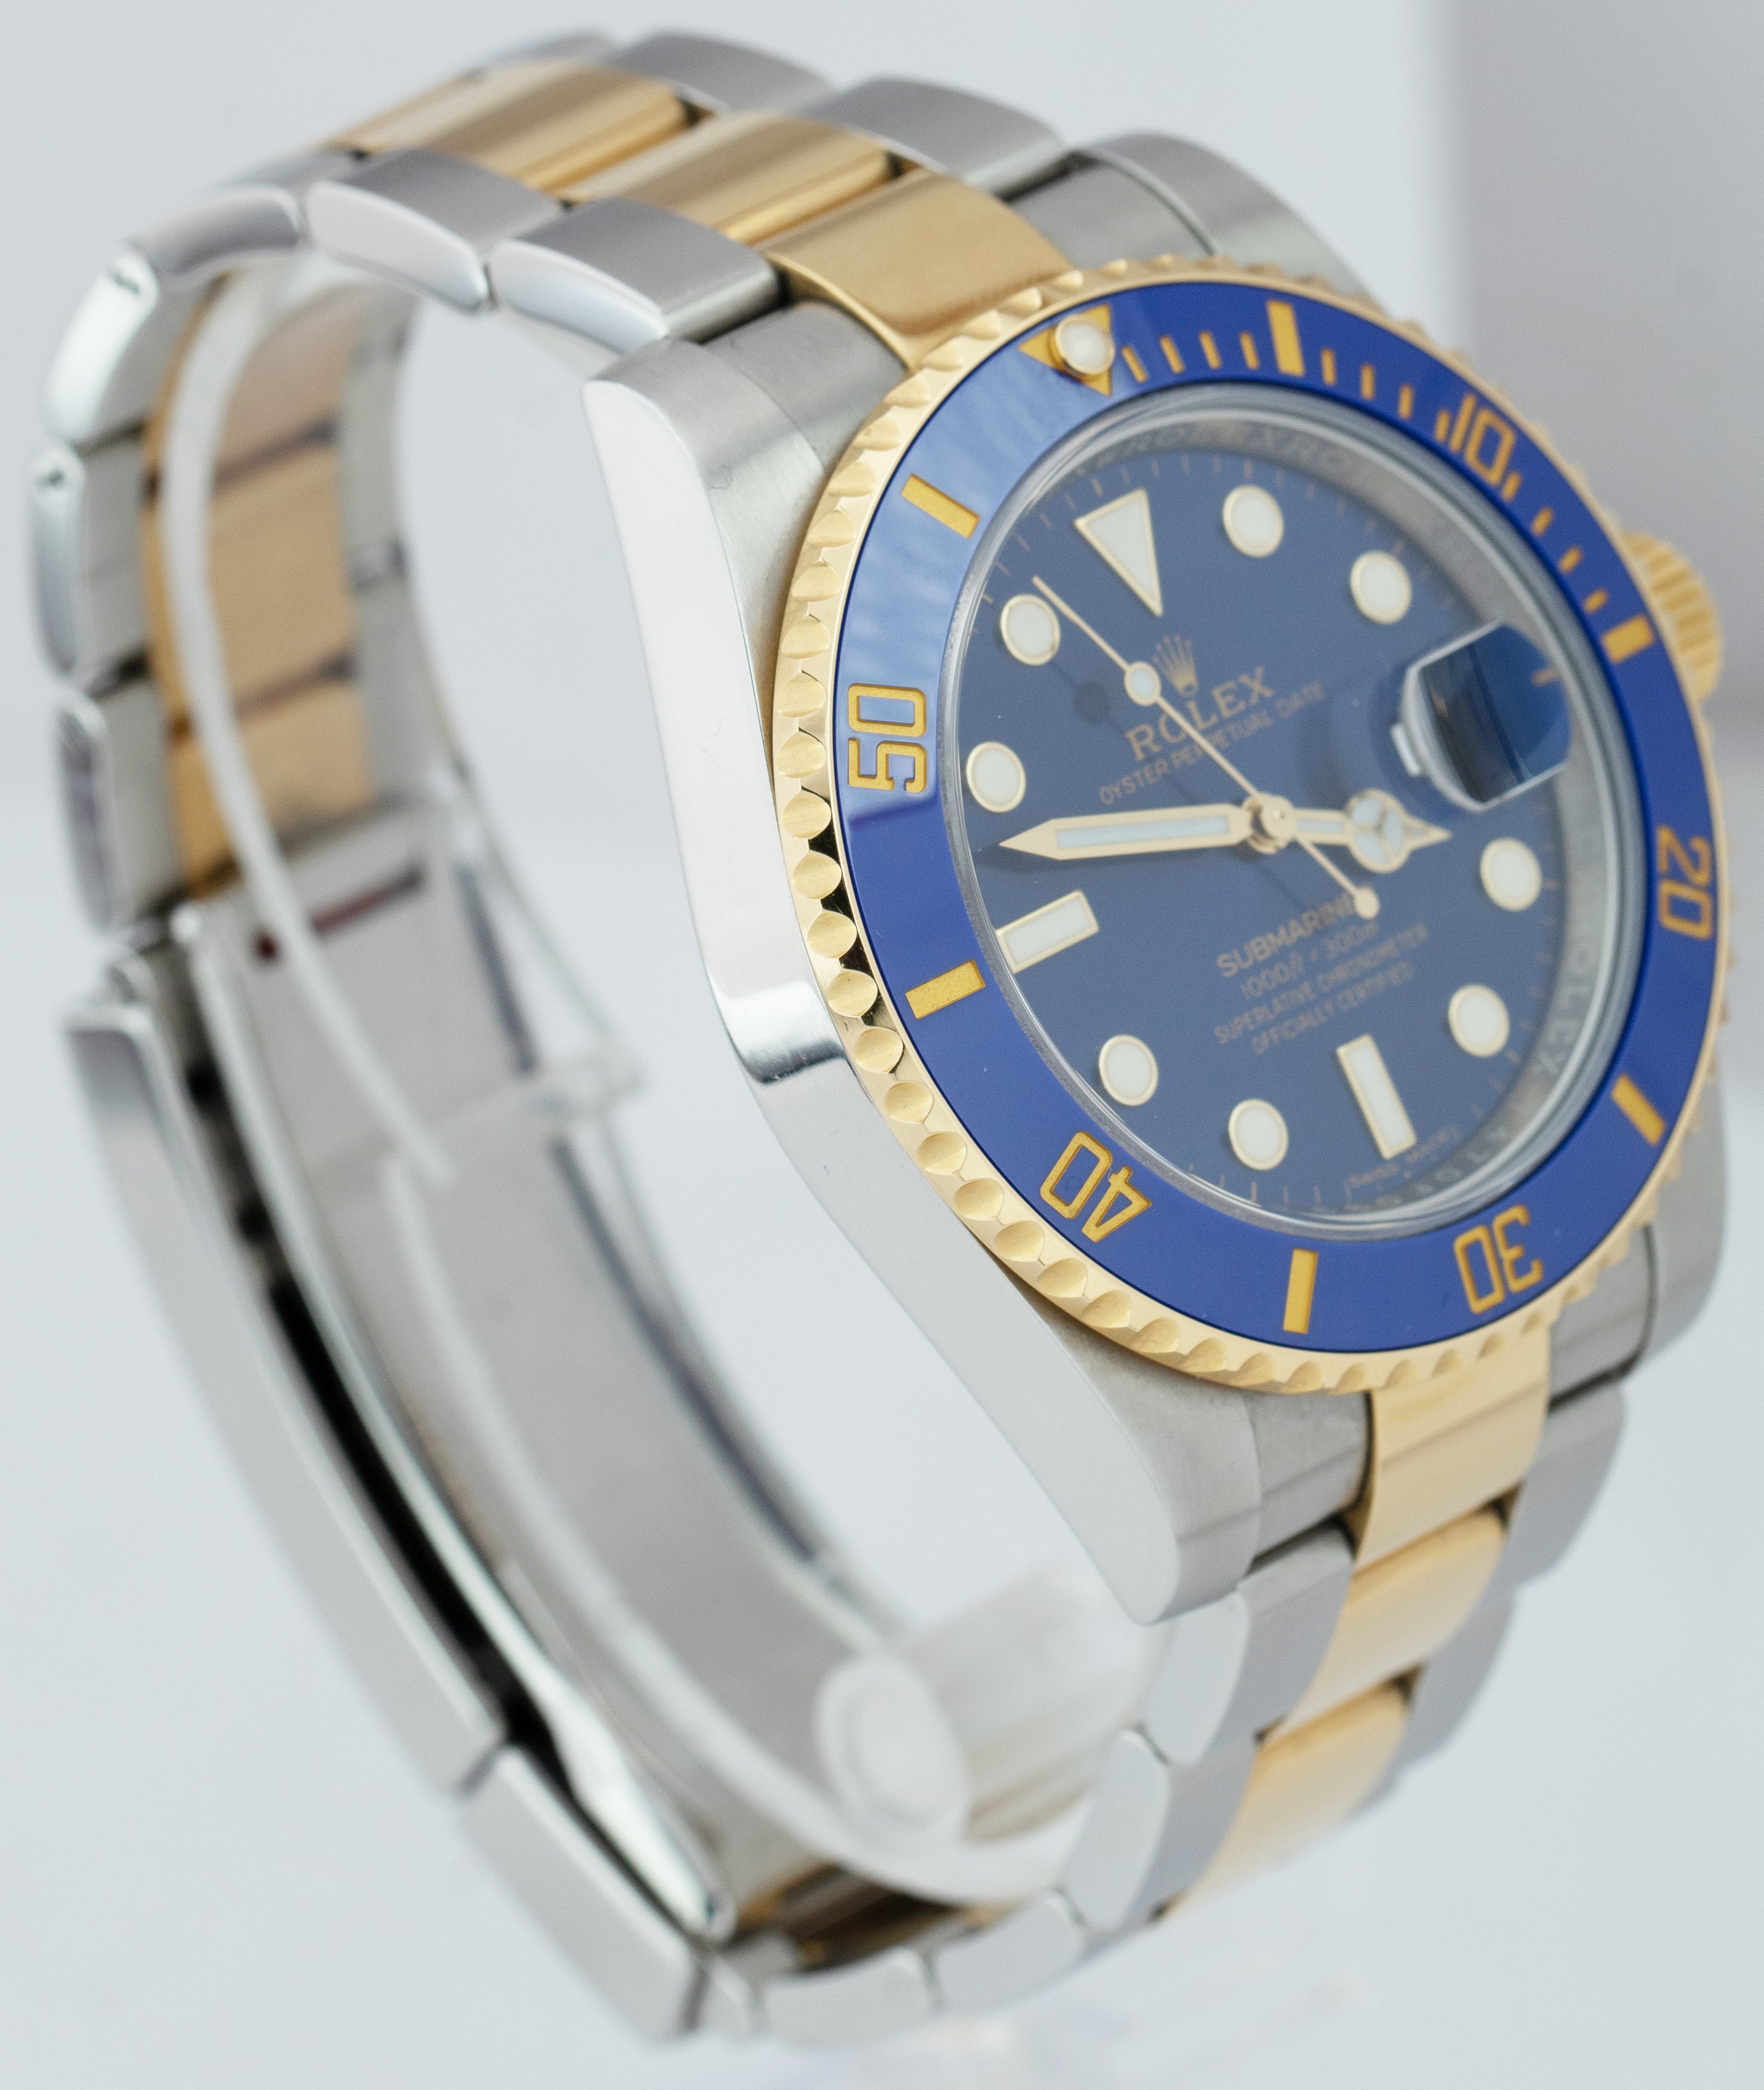 Rolex Submariner Date Ceramic Two-Tone Gold Stainless Steel Blue Watch 116613 LB